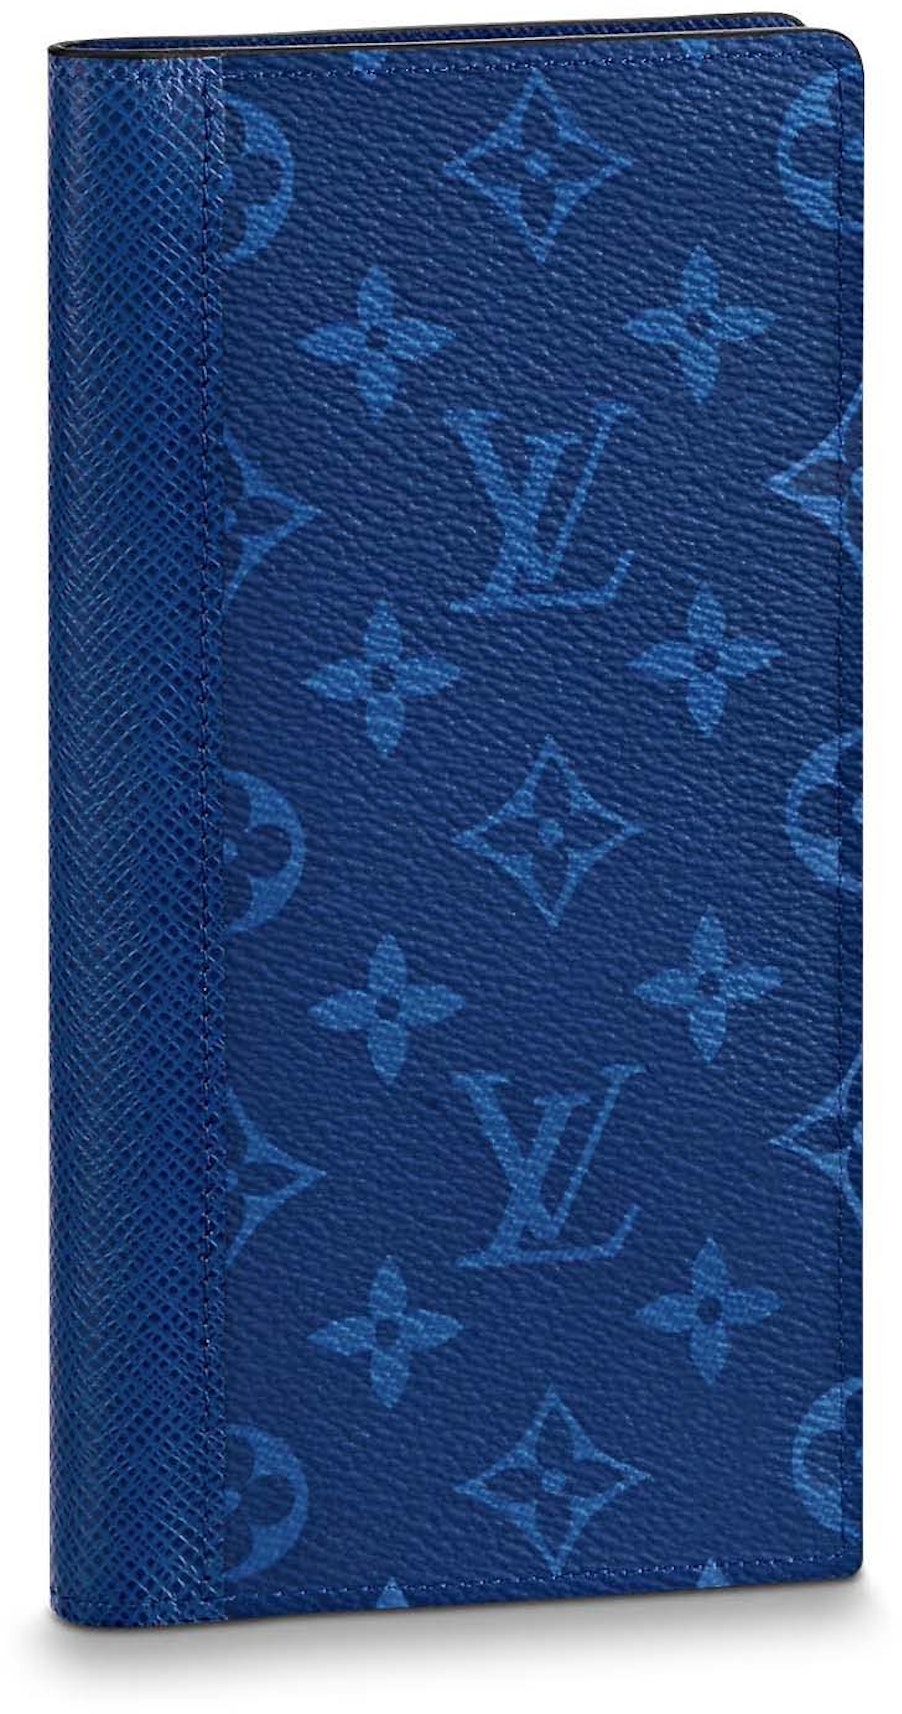 Louis Vuitton Brazza Wallet Navy Blue in Monogram Coated Canvas/Taiga  Cowhide Leather - MX